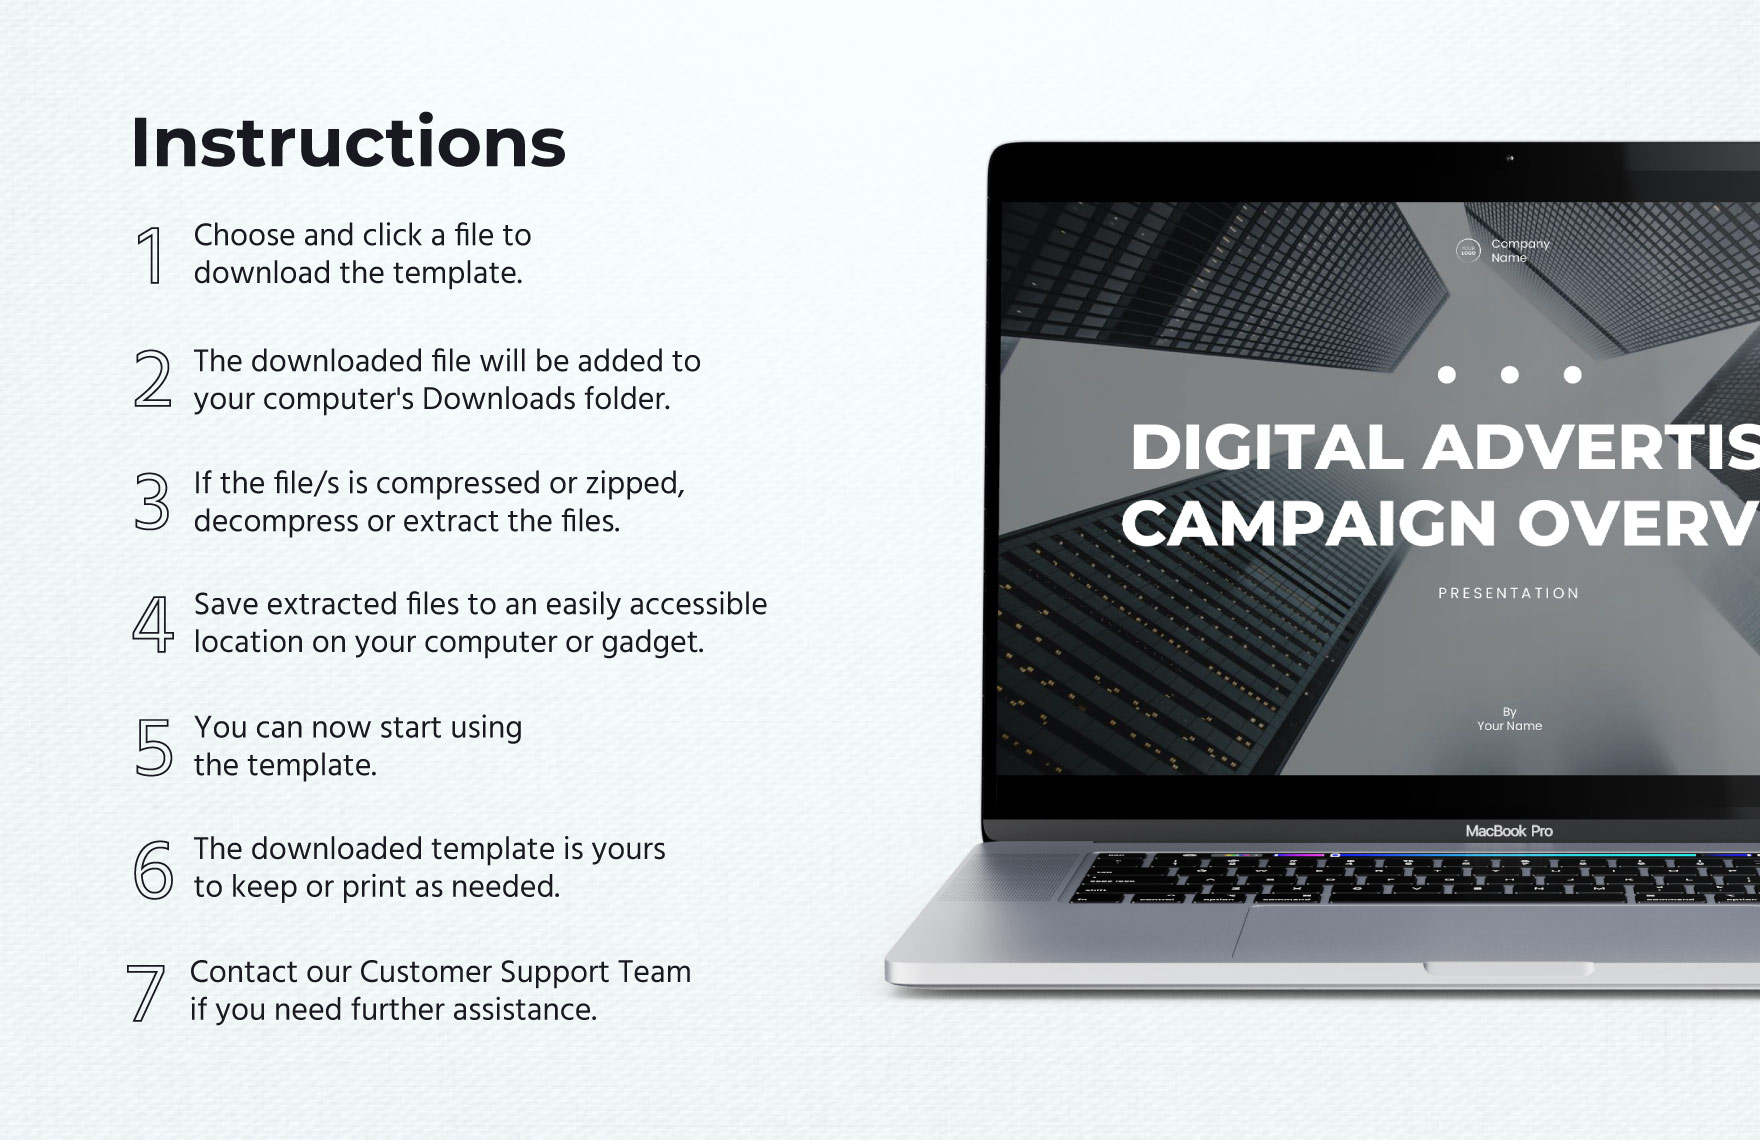 Digital Advertising Campaign Overview Presentation  Template